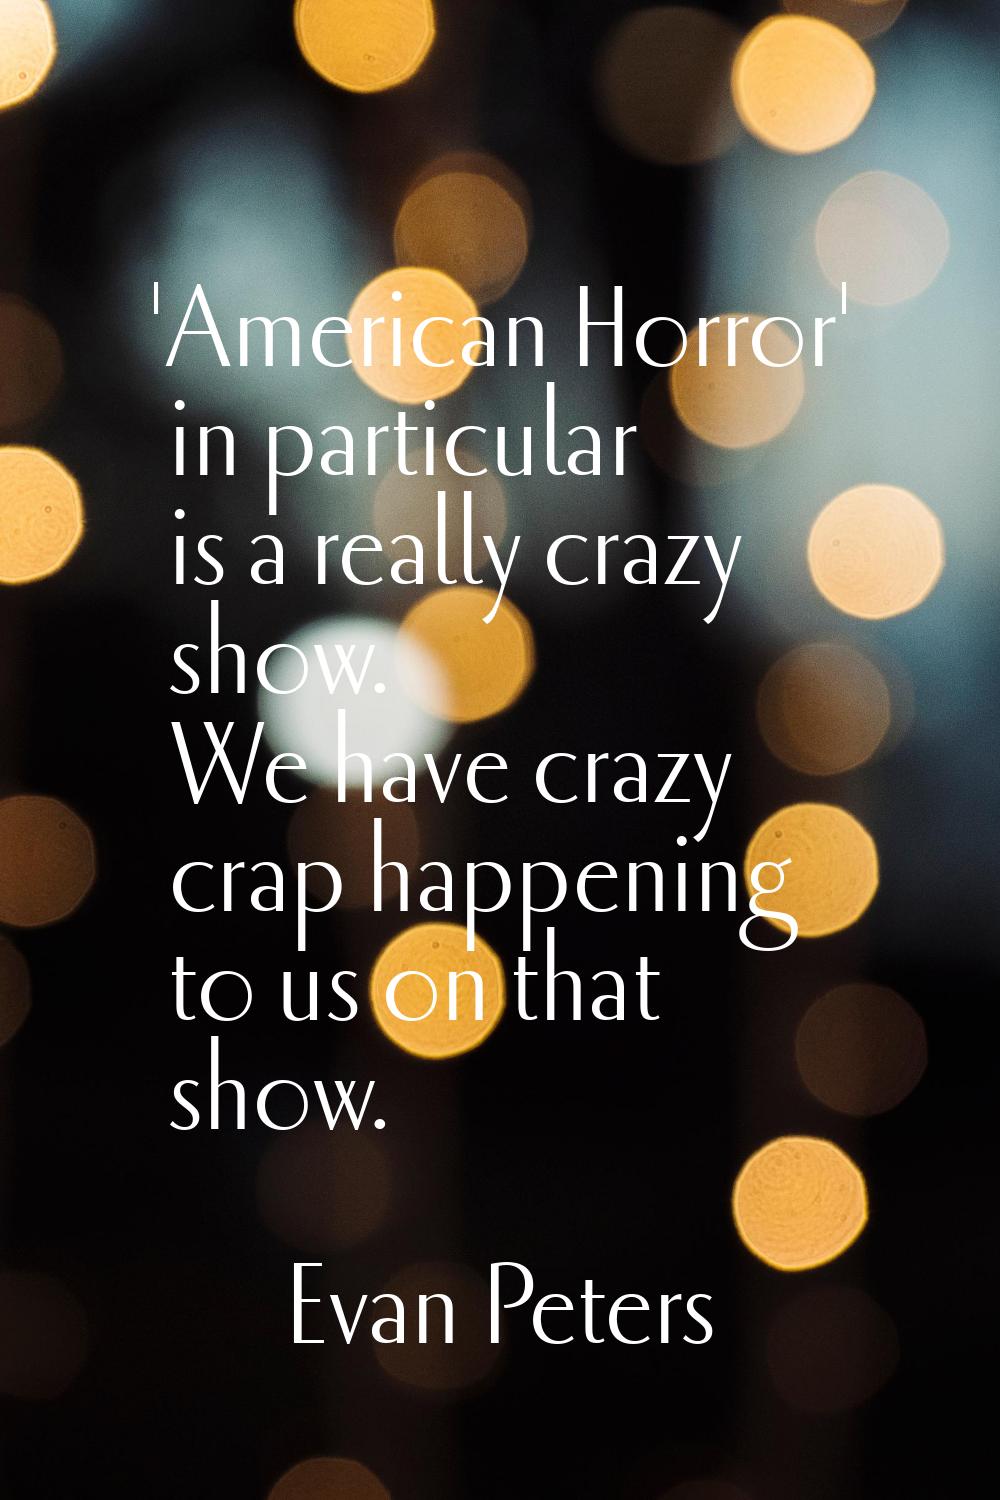 'American Horror' in particular is a really crazy show. We have crazy crap happening to us on that 